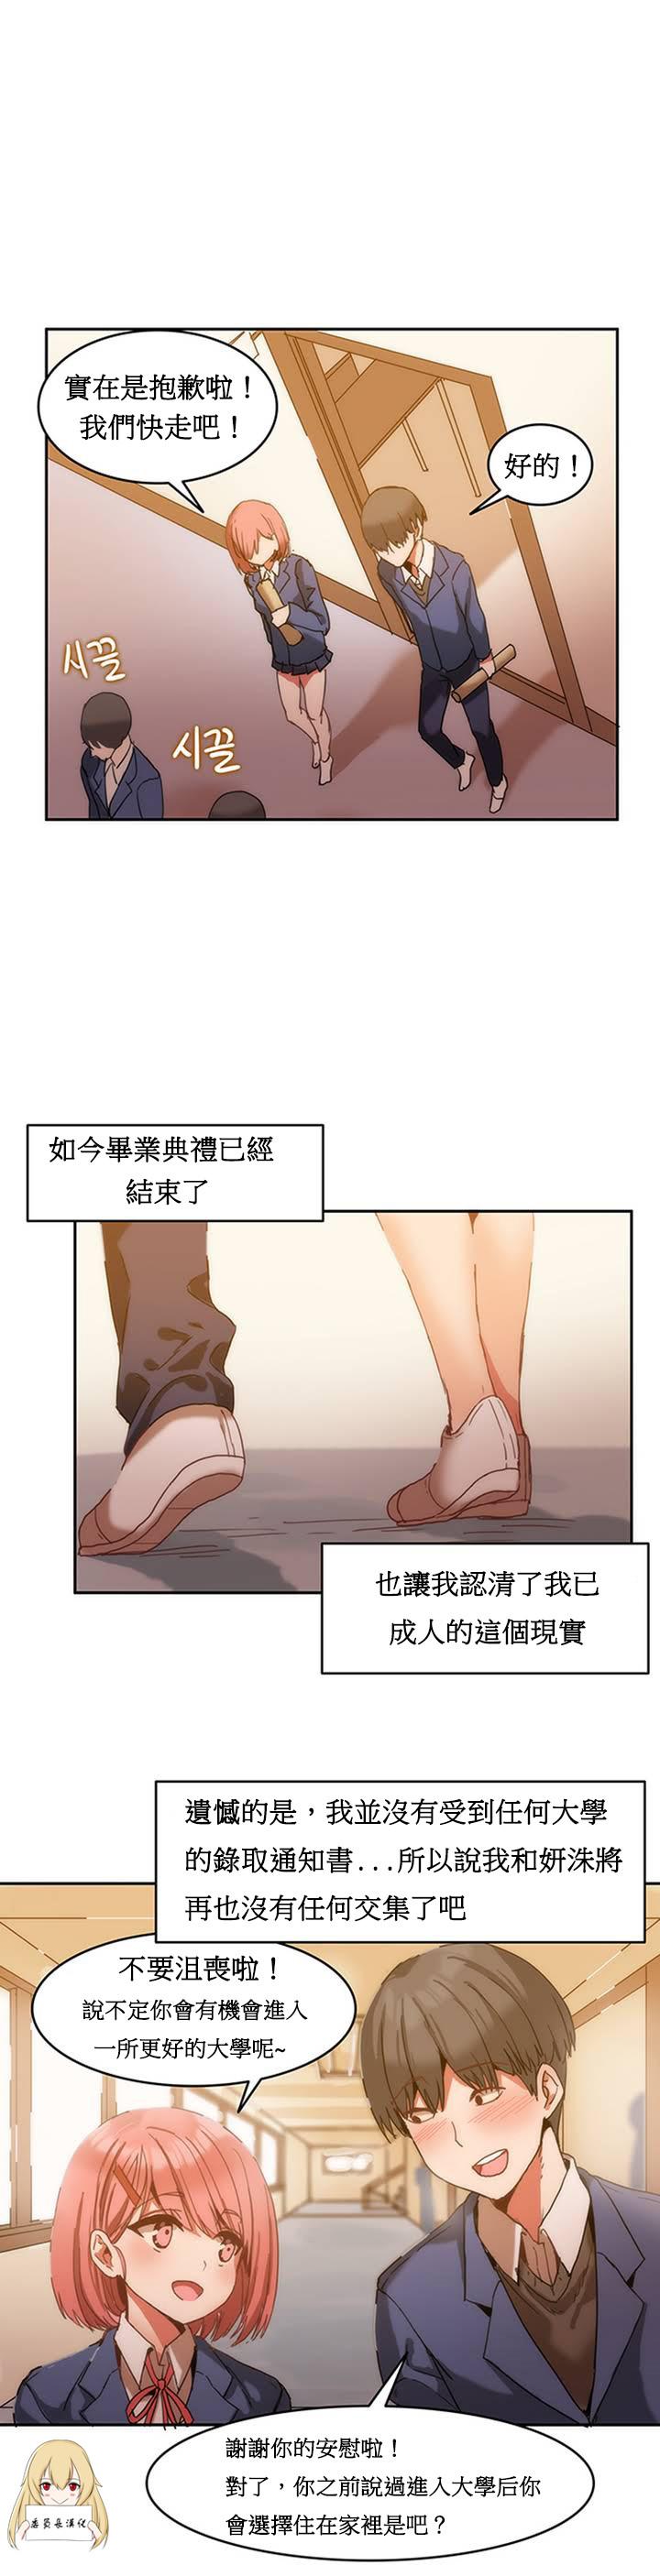 Amateur Porn Hahri's Lumpy Boardhouse Ch. 1~12【委員長個人漢化】（持續更新） Tease - Page 6